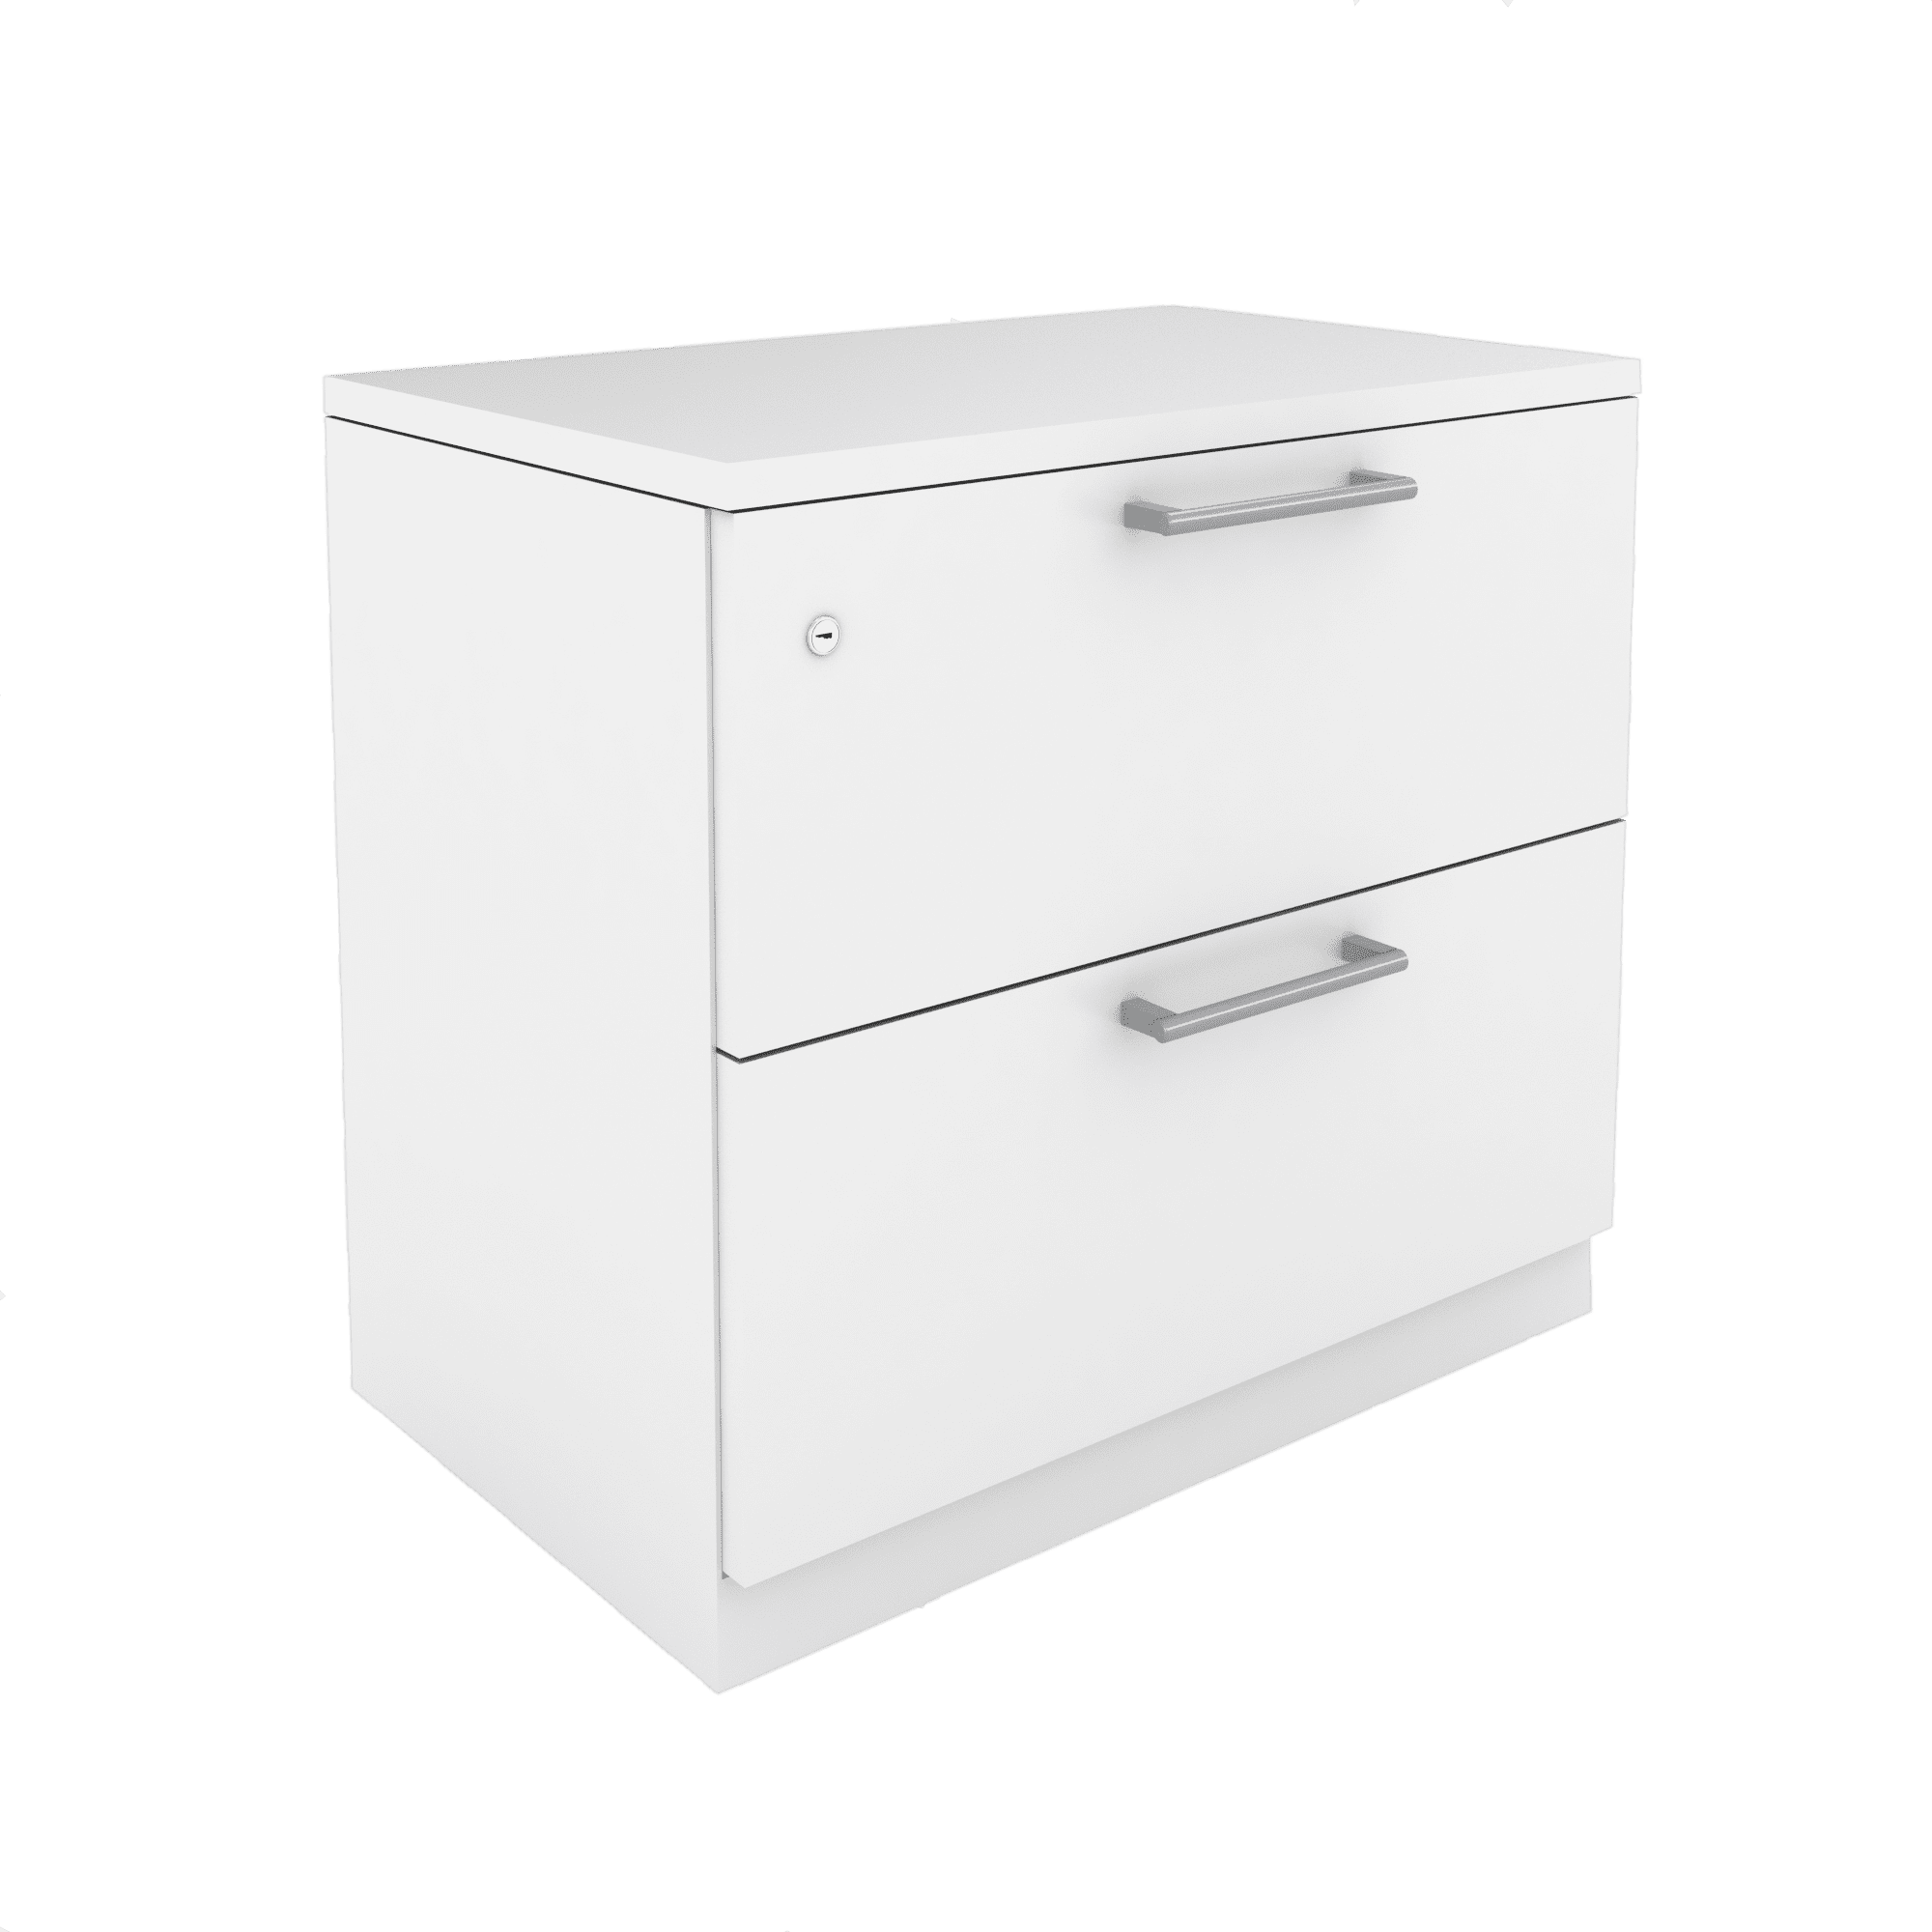 5Dr 30"Wx18"Dx64 1/2"H Lateral File Cabinet by Steelcase Office Furniture inGray 